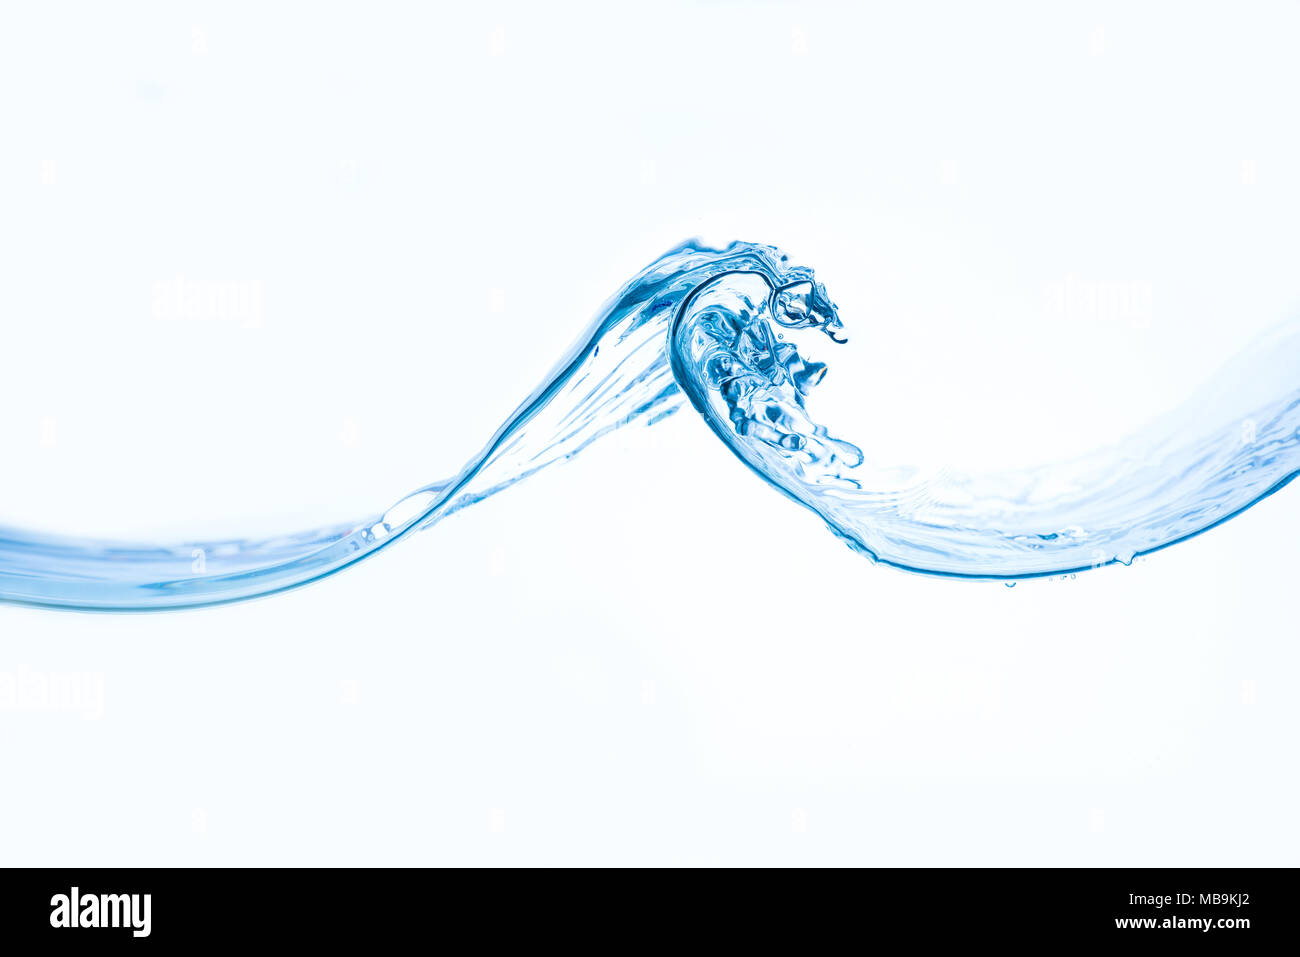 Wave of water against a white background Stock Photo